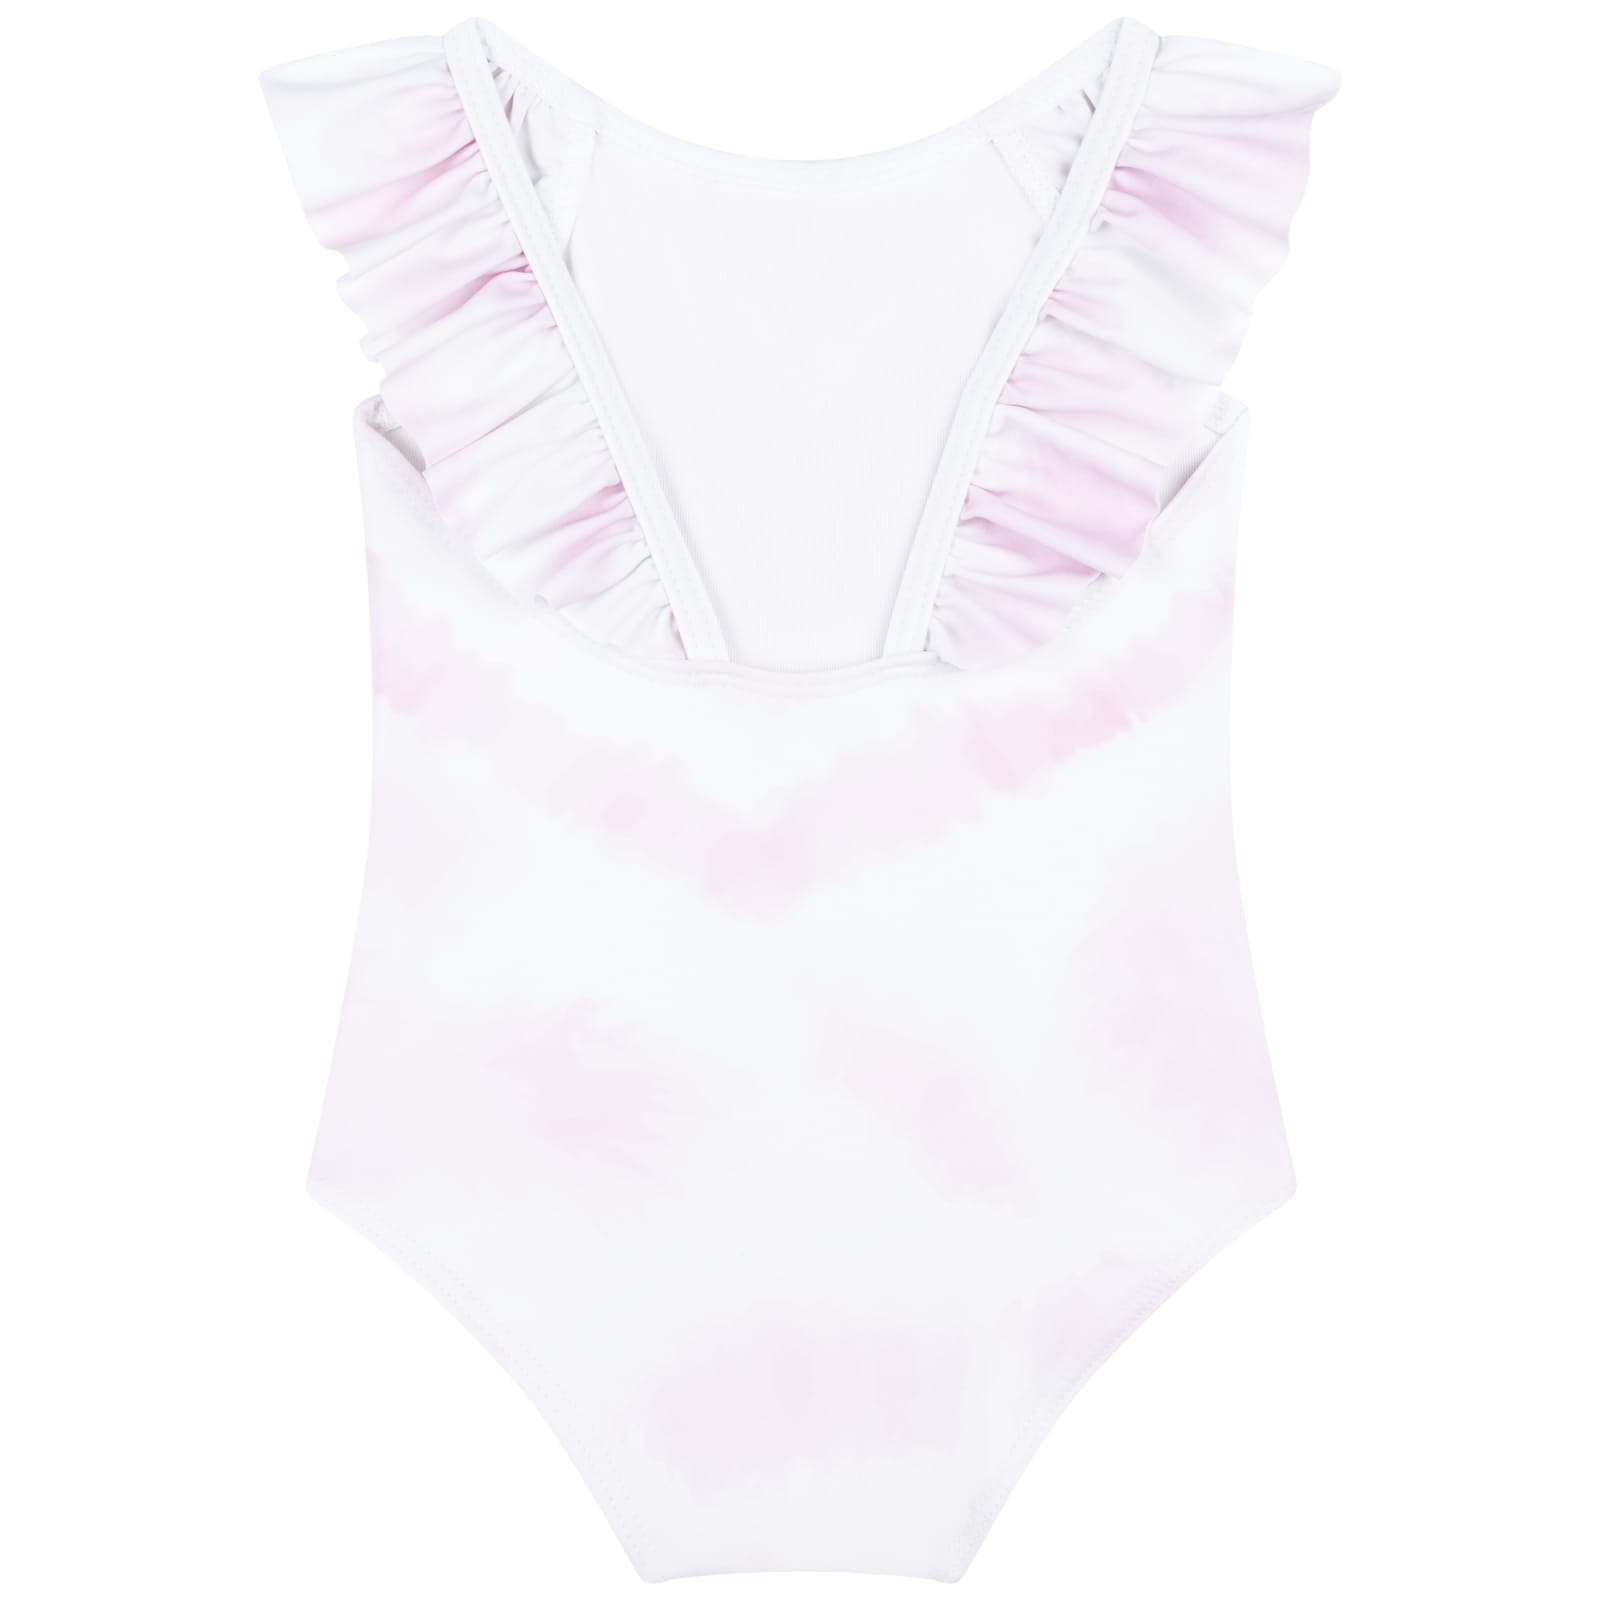 Shop Givenchy Swimsuit With Print In Pink